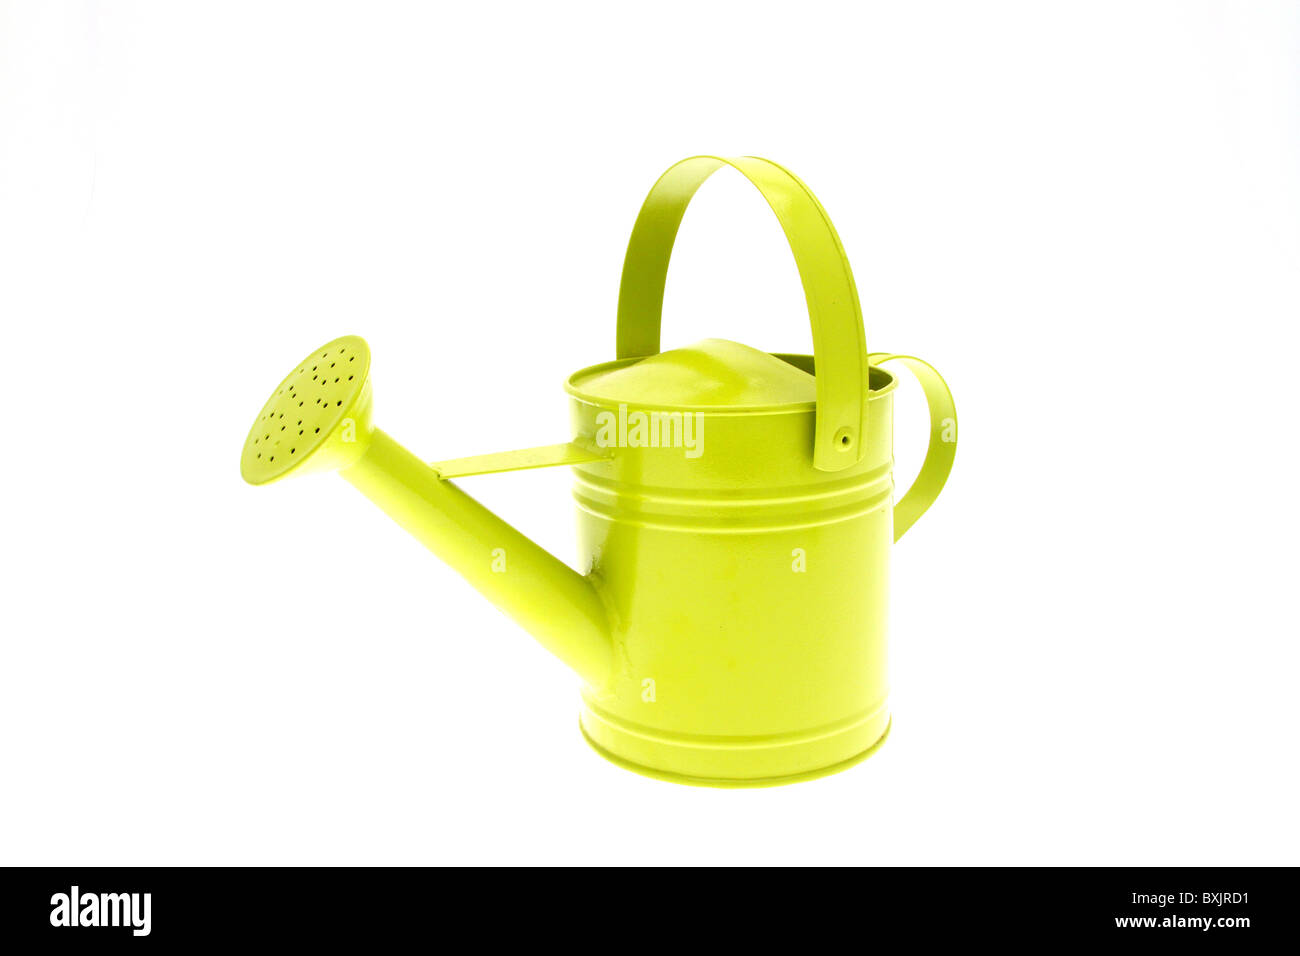 High key image of a green watering can against a white background Stock Photo